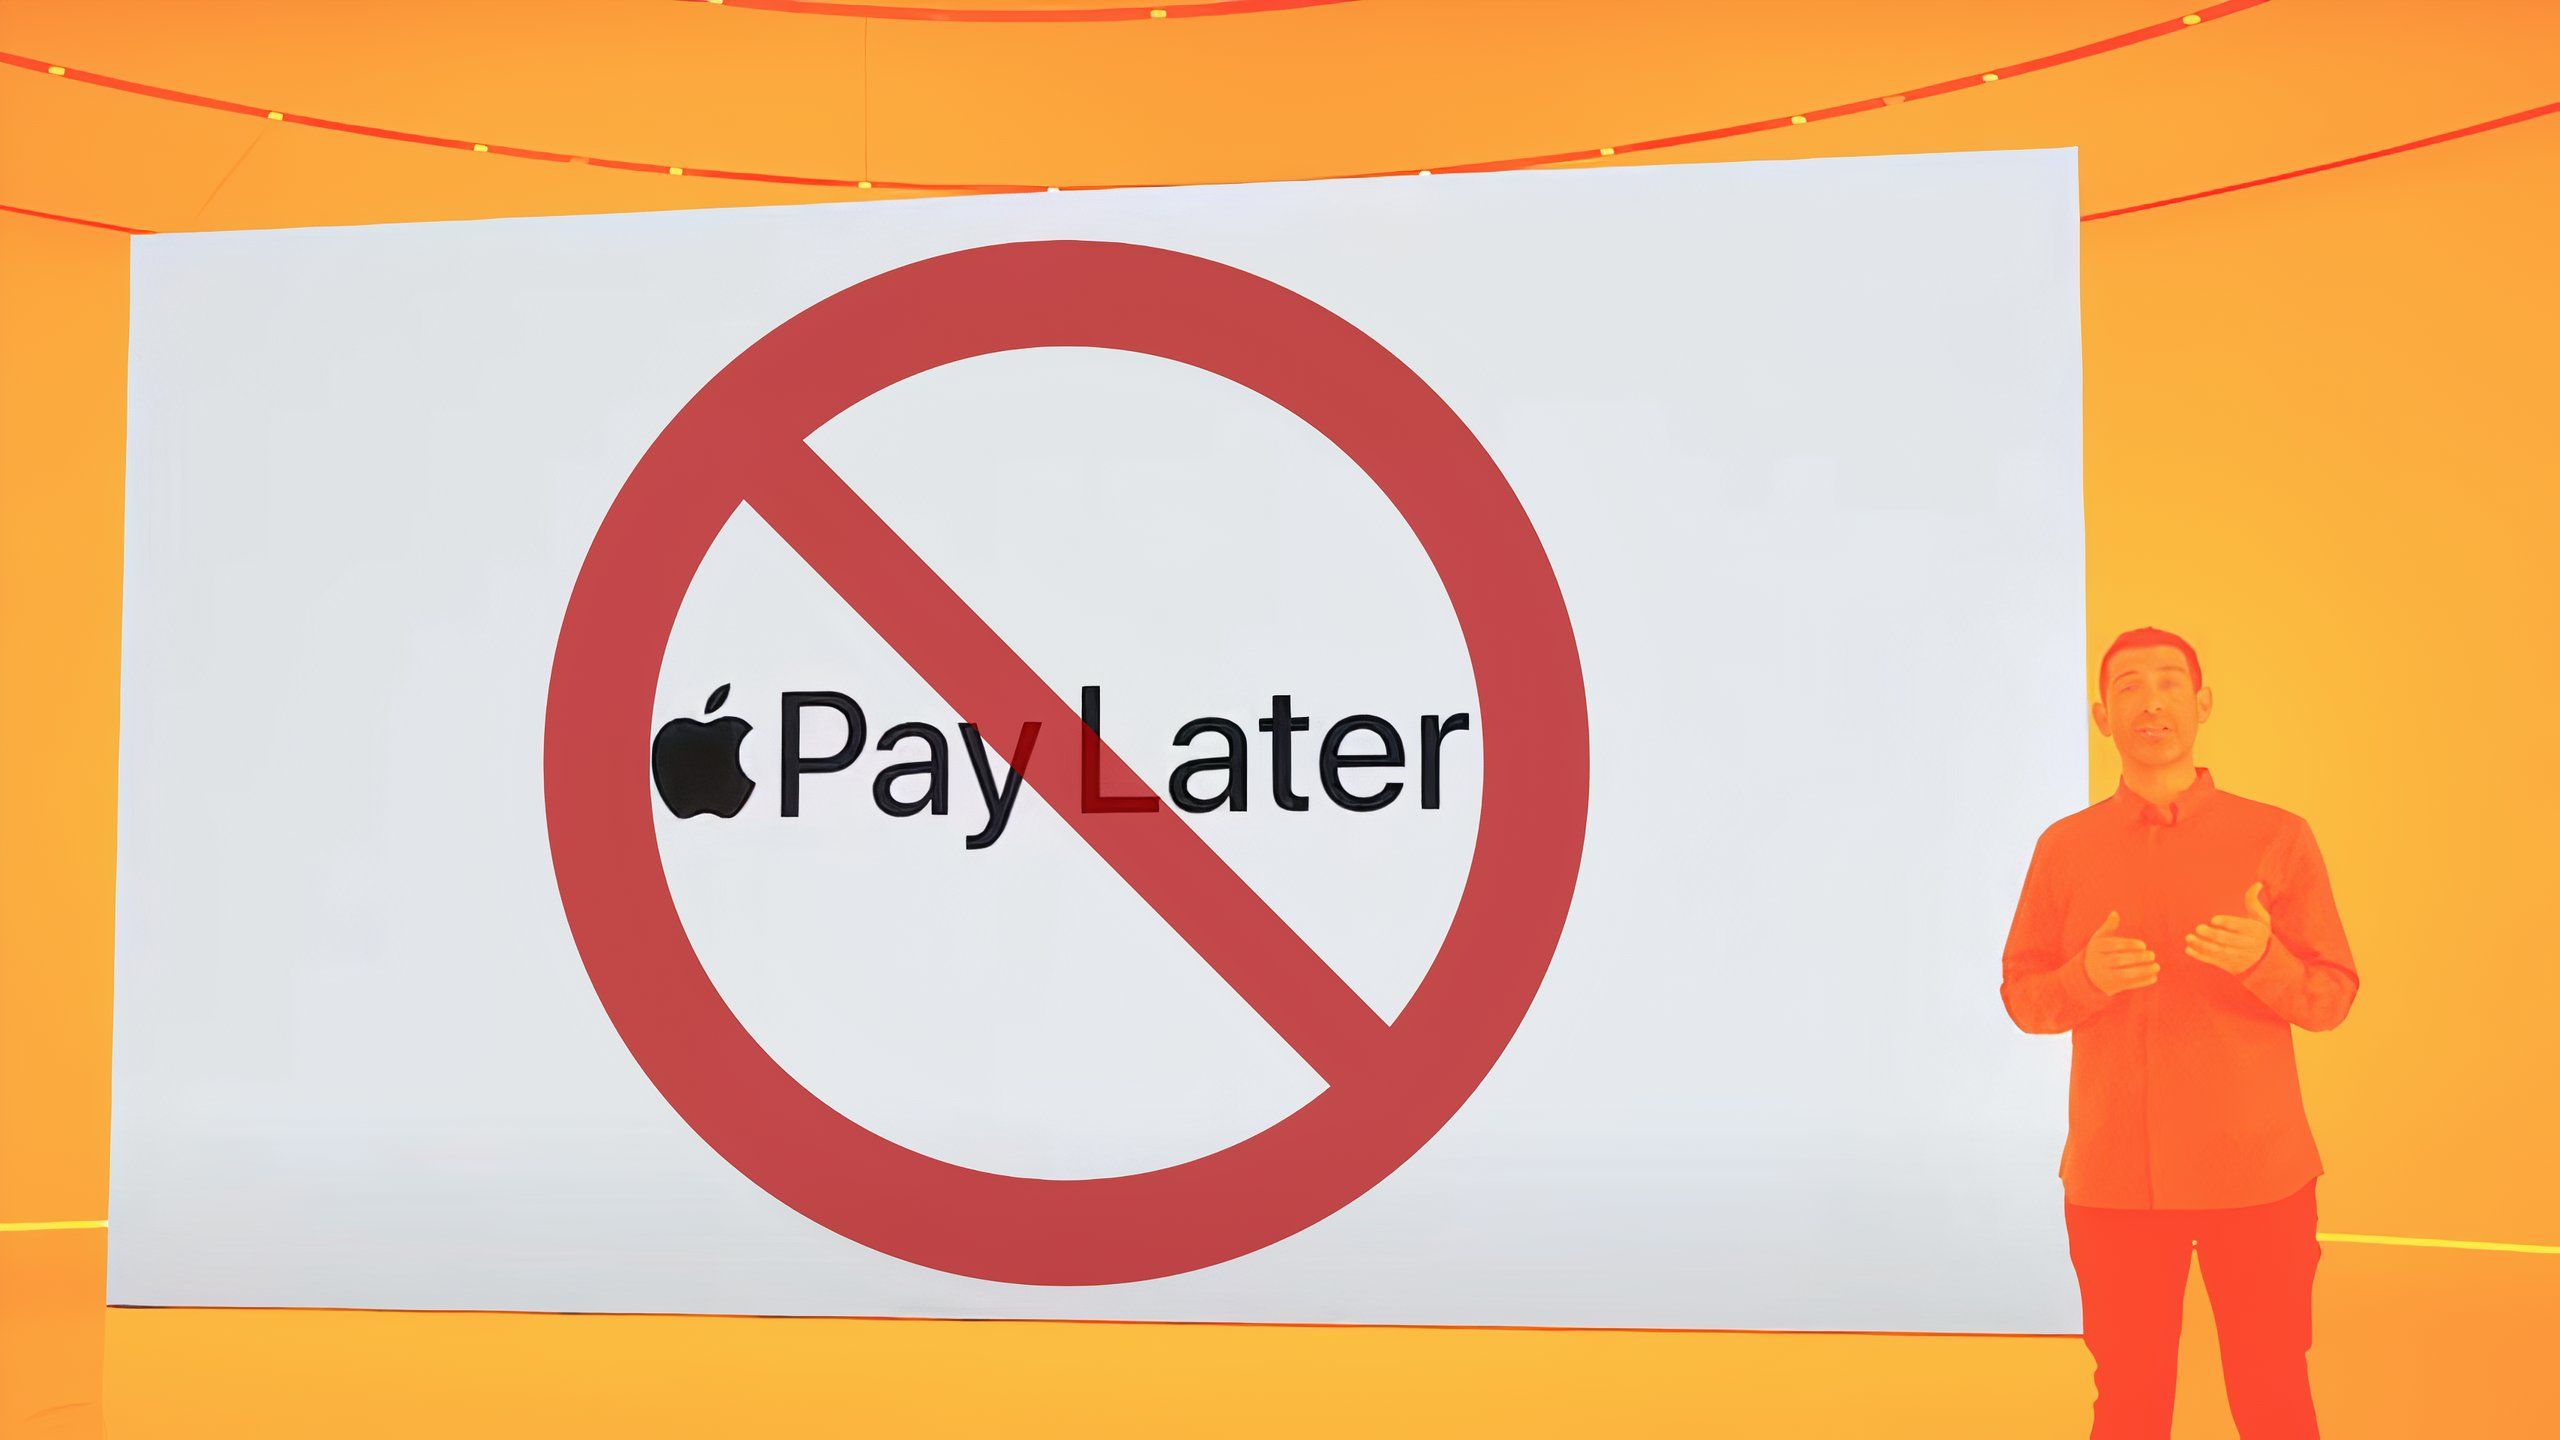 Apple Pay Later is shutting down